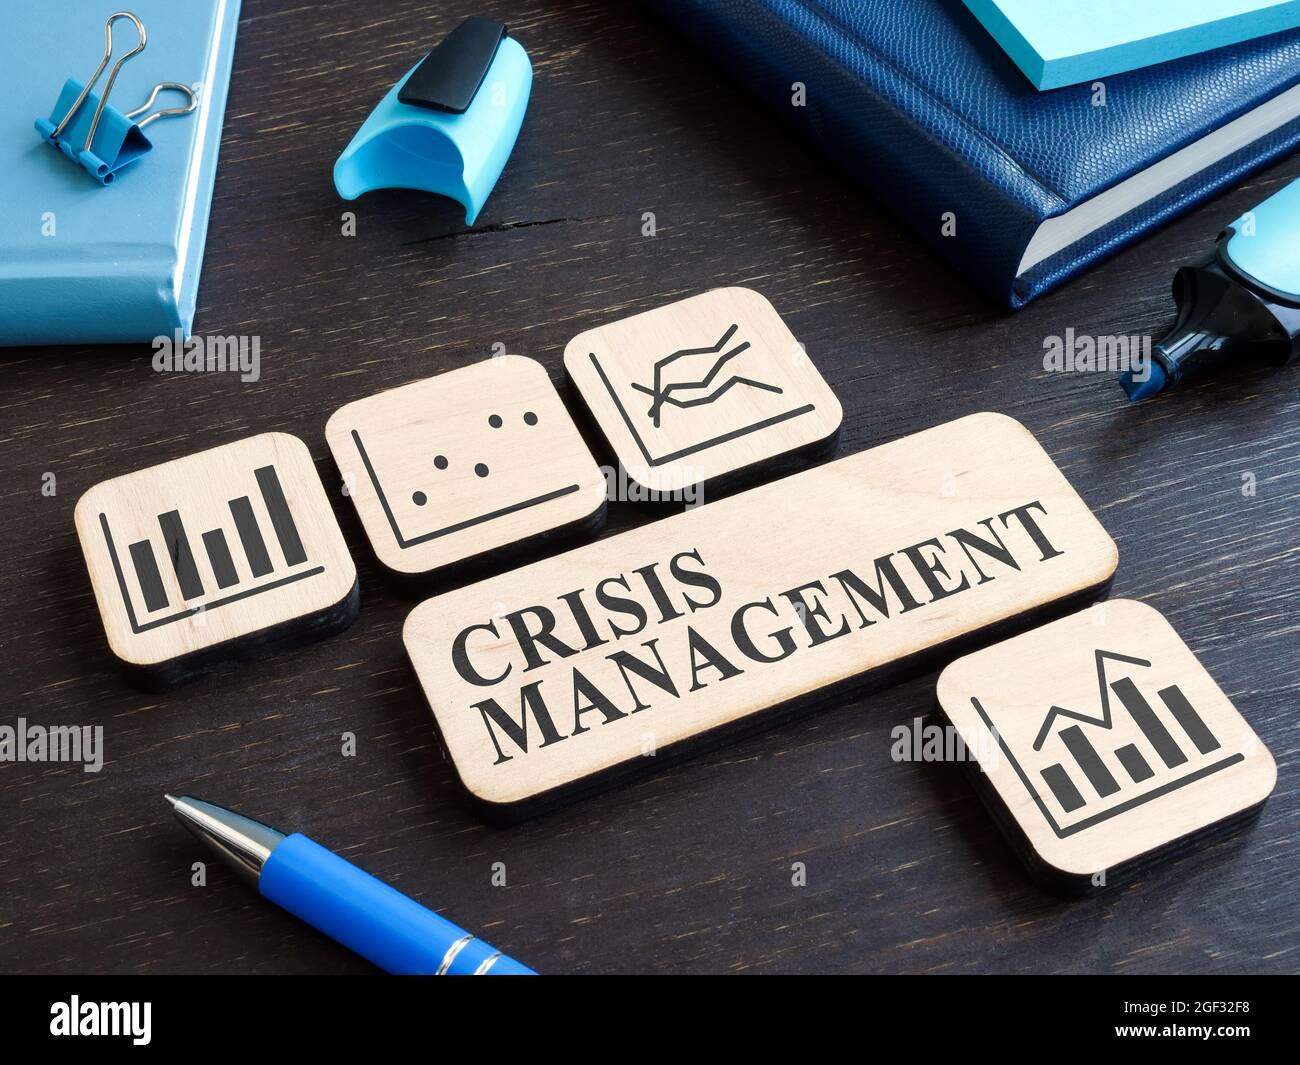 Crisis management on the wooden plate and plates with charts. Stock Photo